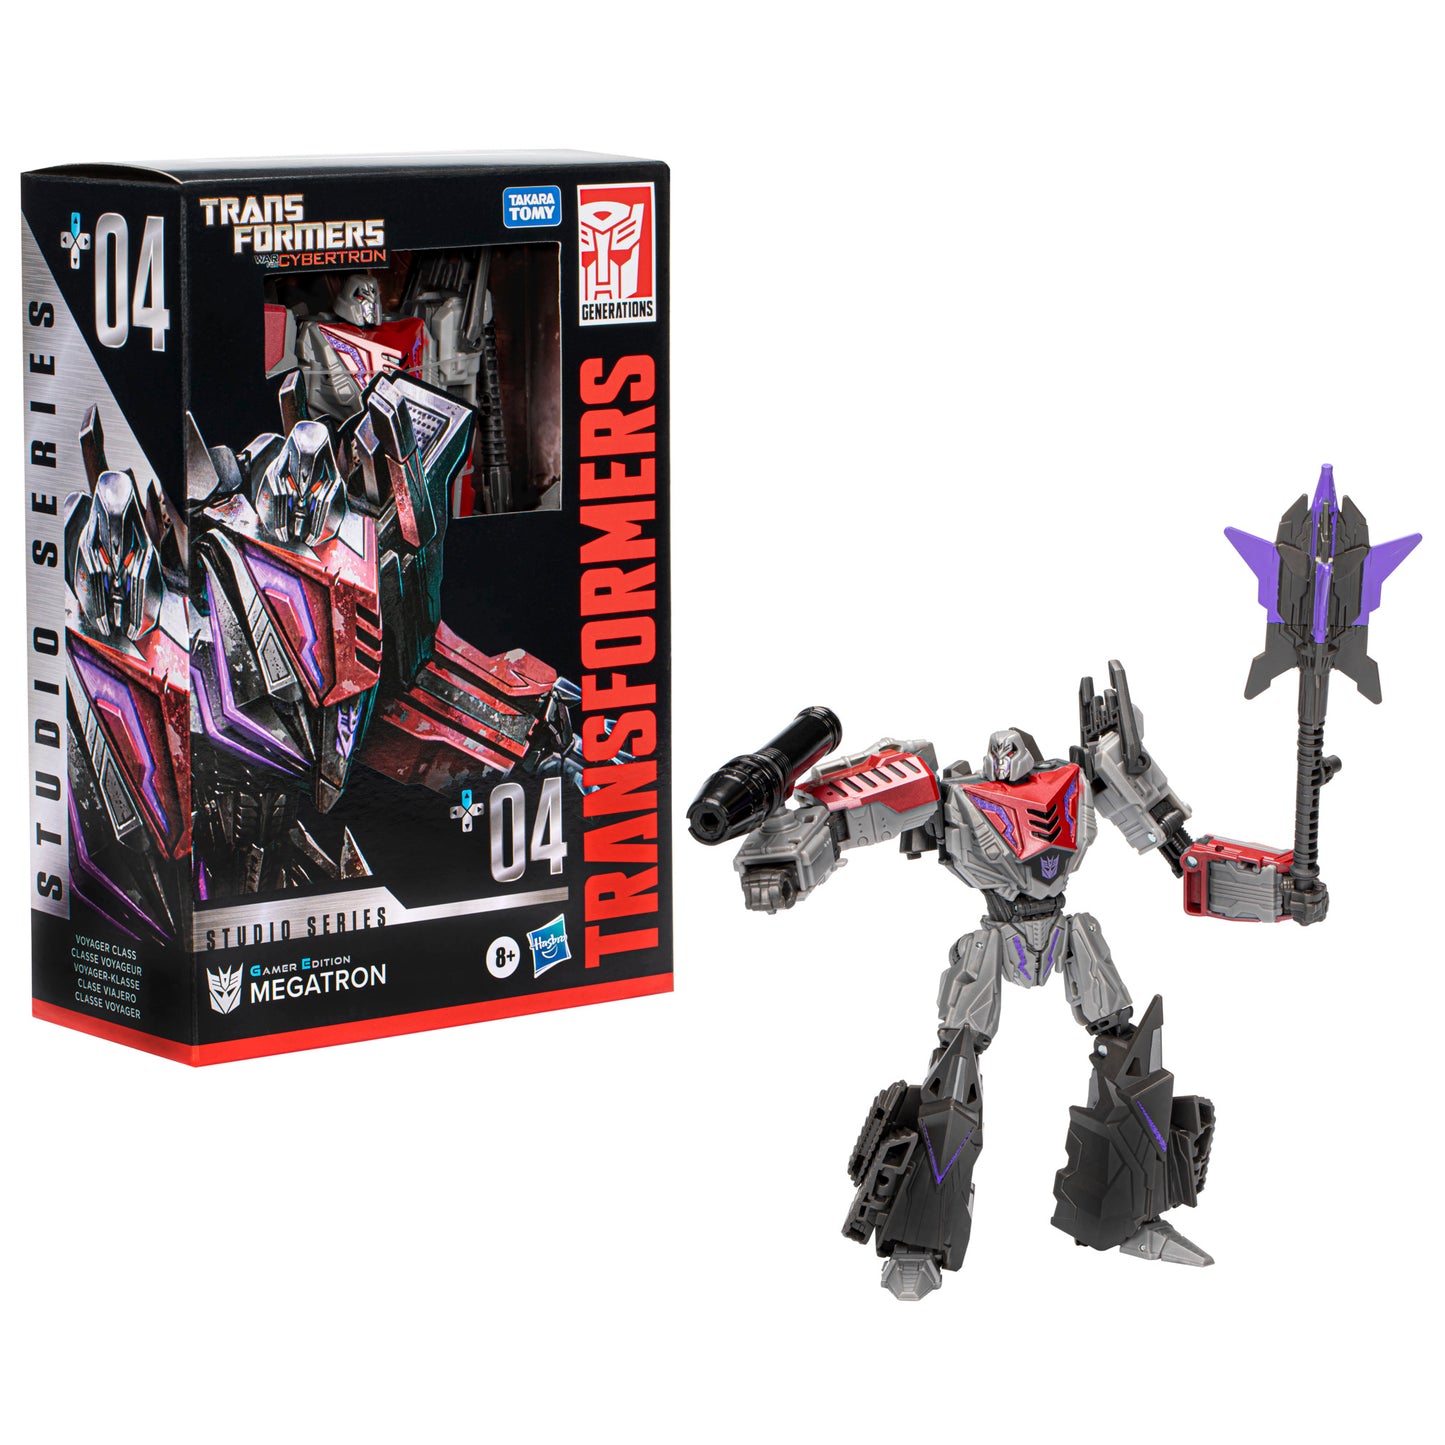 Transformers Studio Series Voyager 04 Gamer Edition Megatron Action Figure Toy - Heretoserveyou